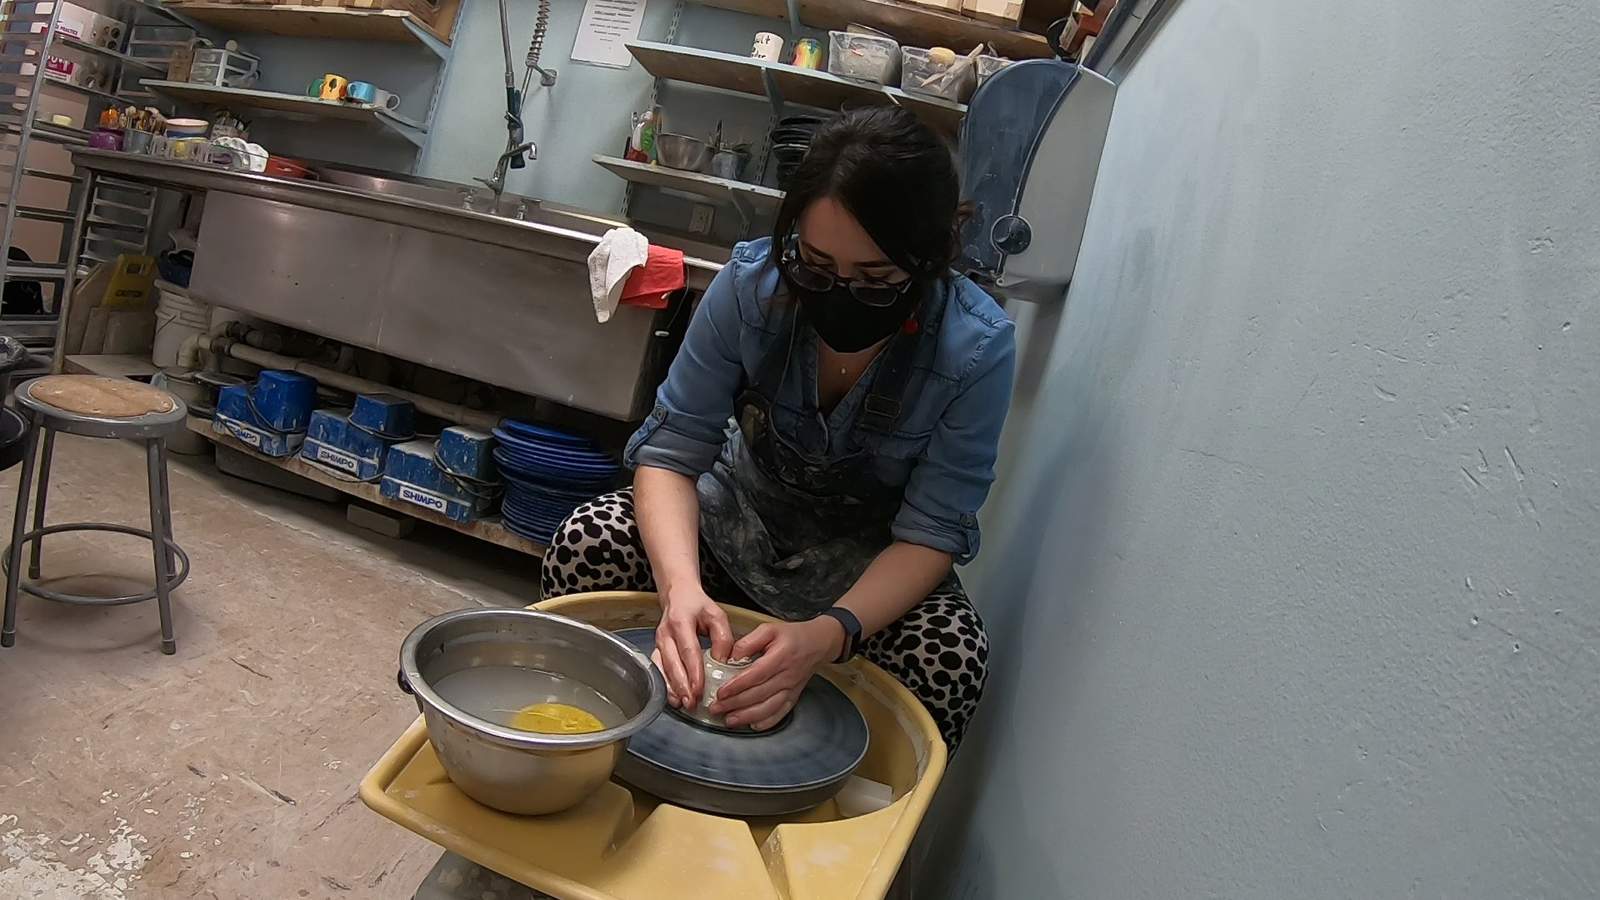 You can get behind the wheel and learn how to make your own pottery here